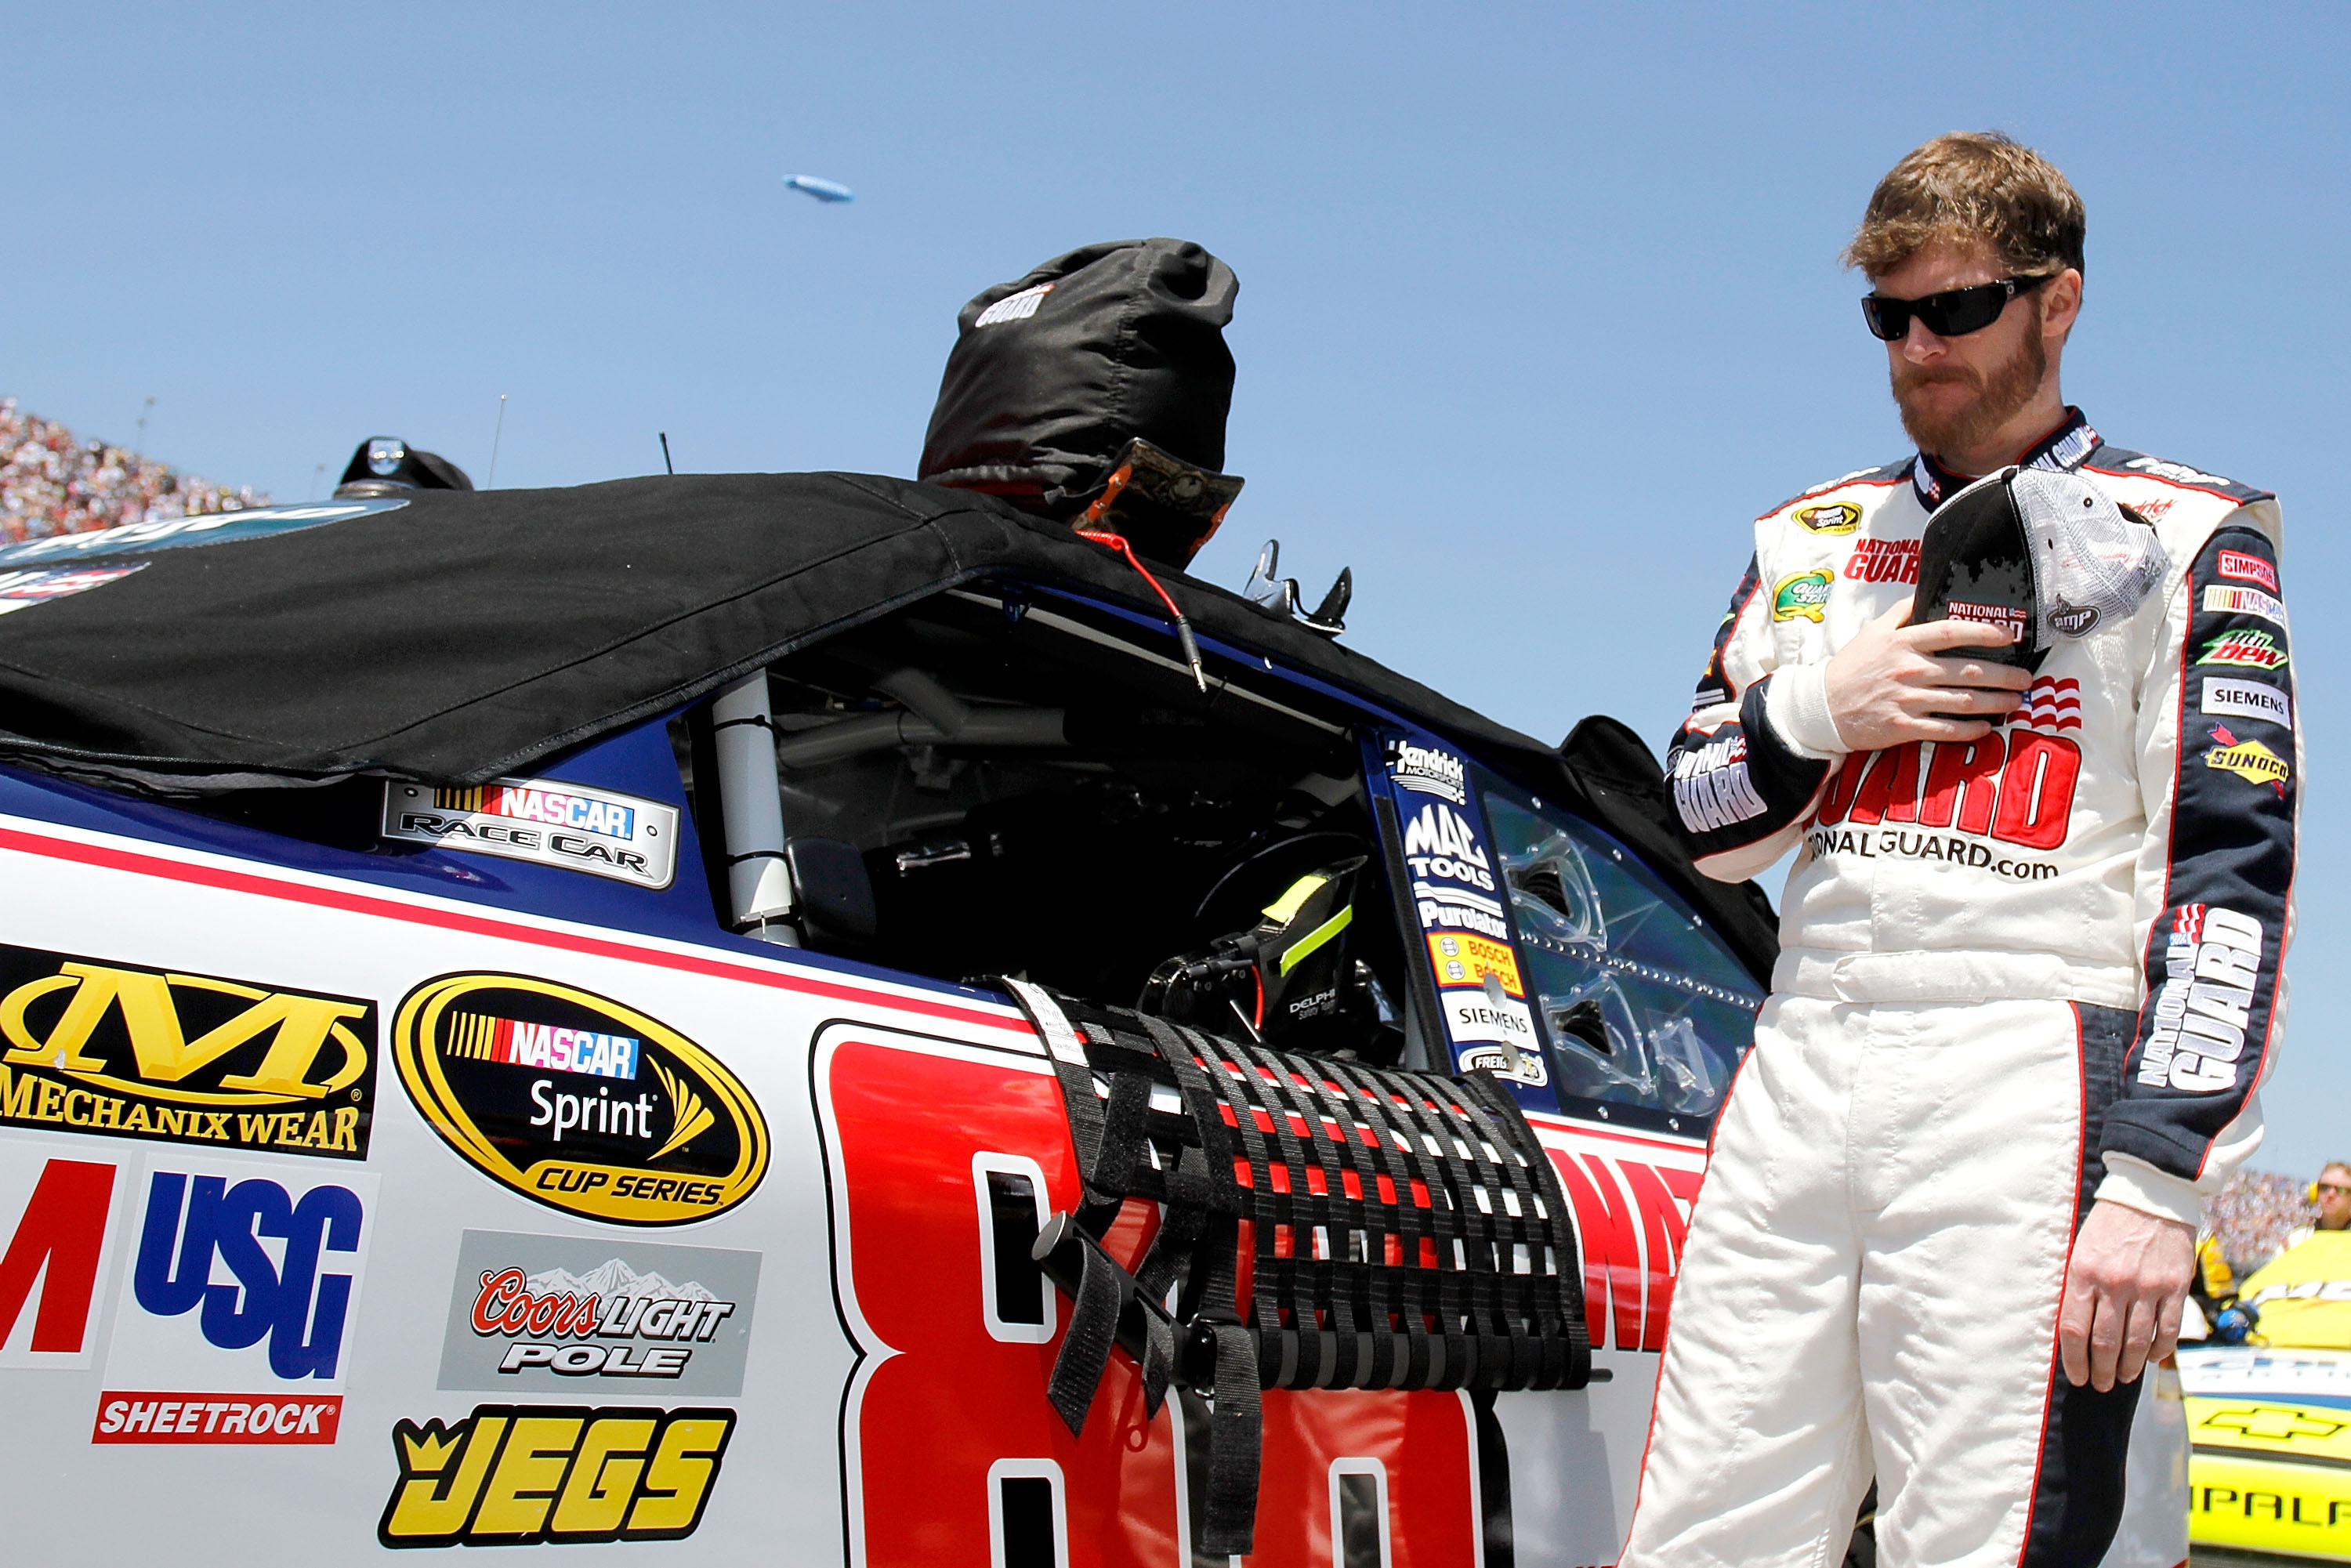 TALLADEGA, AL - APRIL 17:  Dale Earnhardt Jr., driver of the #88 National Guard/Amp Energy Chevrolet, stands on the grid prior to the start of the NASCAR Sprint Cup Series Aaron's 499 at Talladega Superspeedway on April 17, 2011 in Talladega, Alabama.  (P